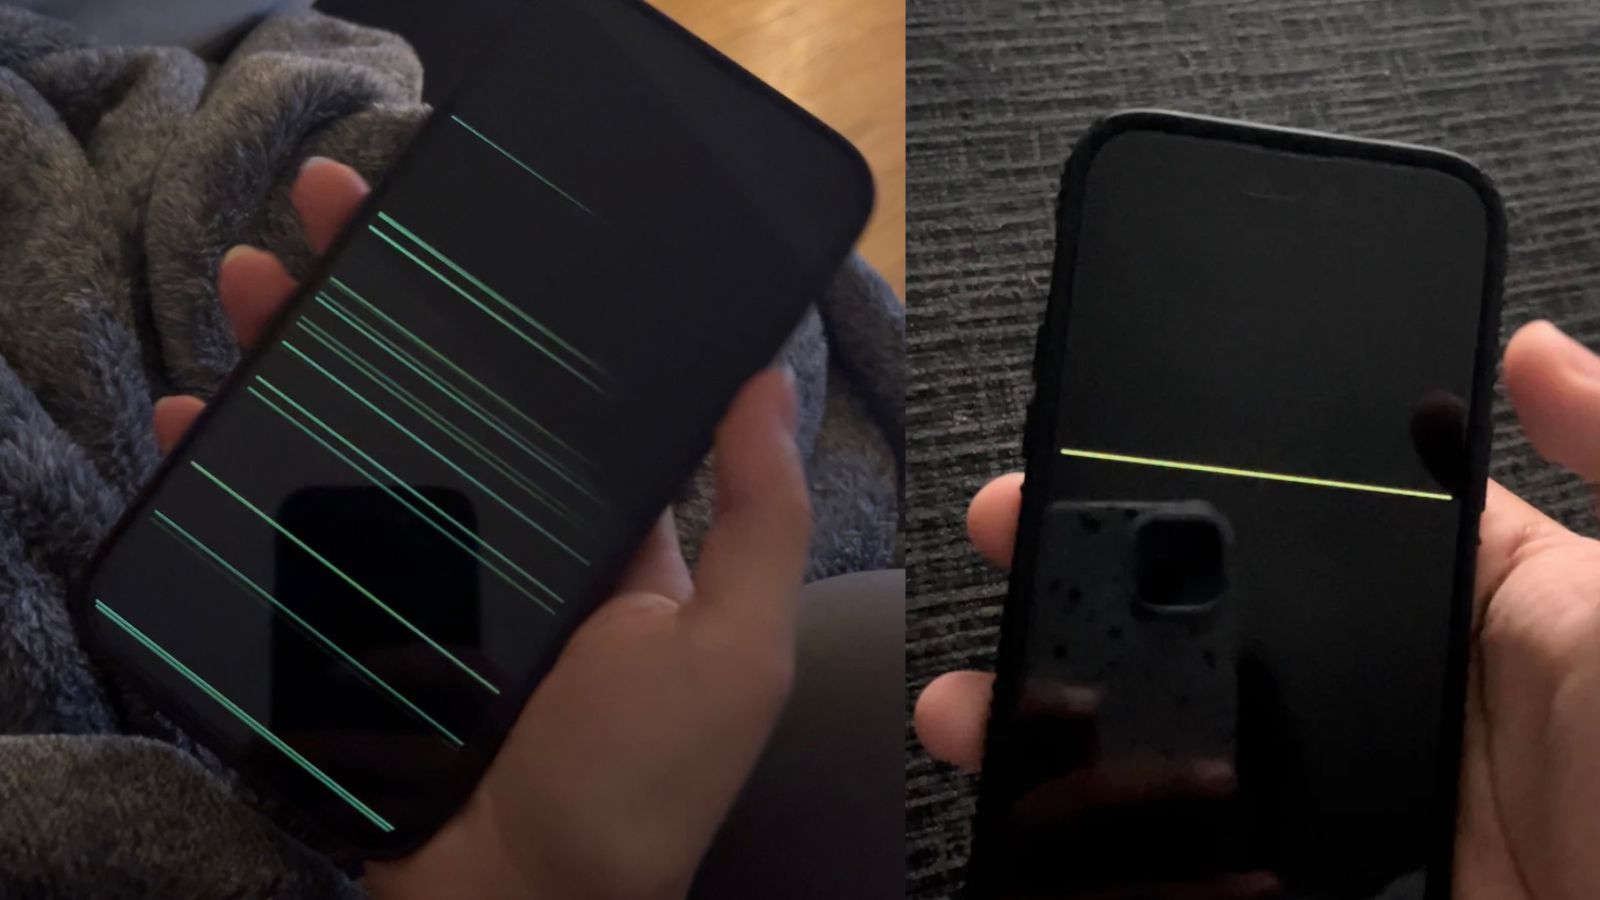 Troubleshooting Steps For Green Screen Flickering On Iphone